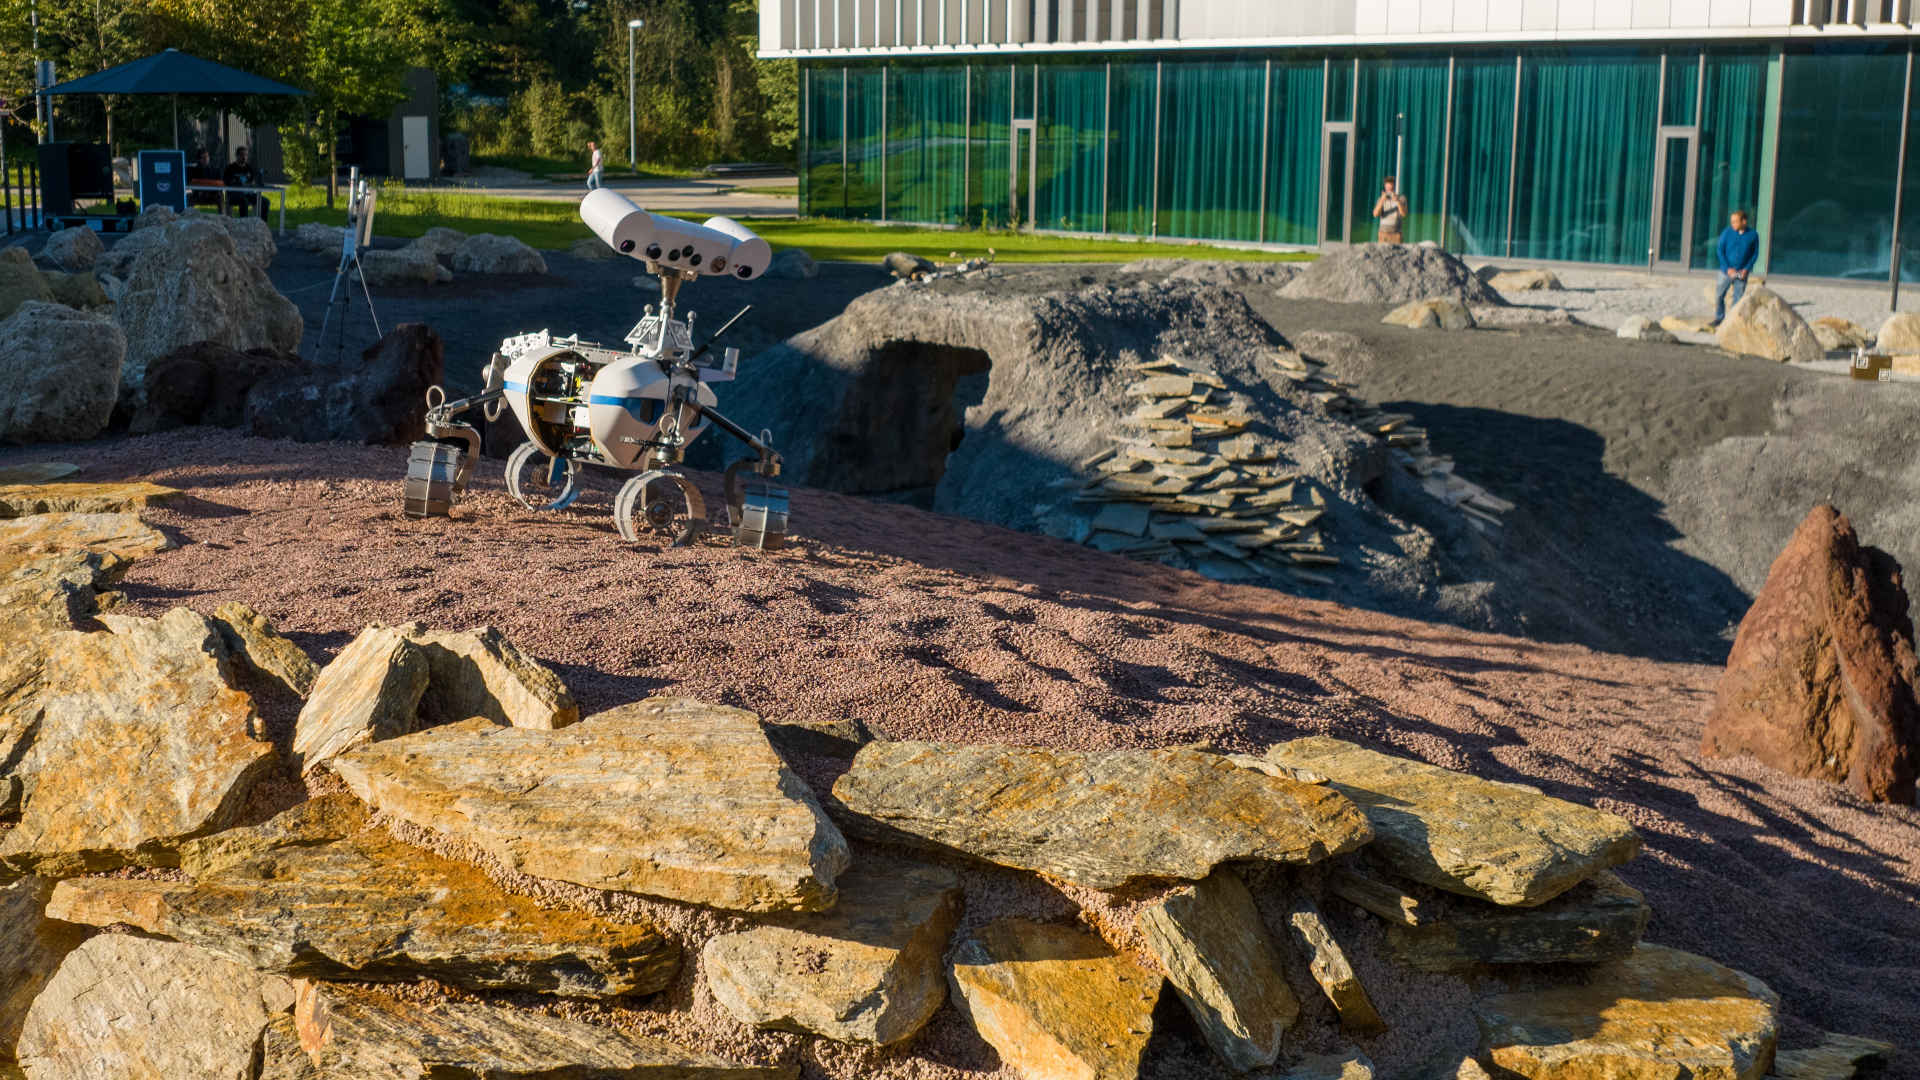 The LRU-2 (Lightweight Robotic Unit) robot has already been to Mount Etna. Now it can be tested directly on the Moon-Mars terrain in Oberpfaffenhofen. (DLR)